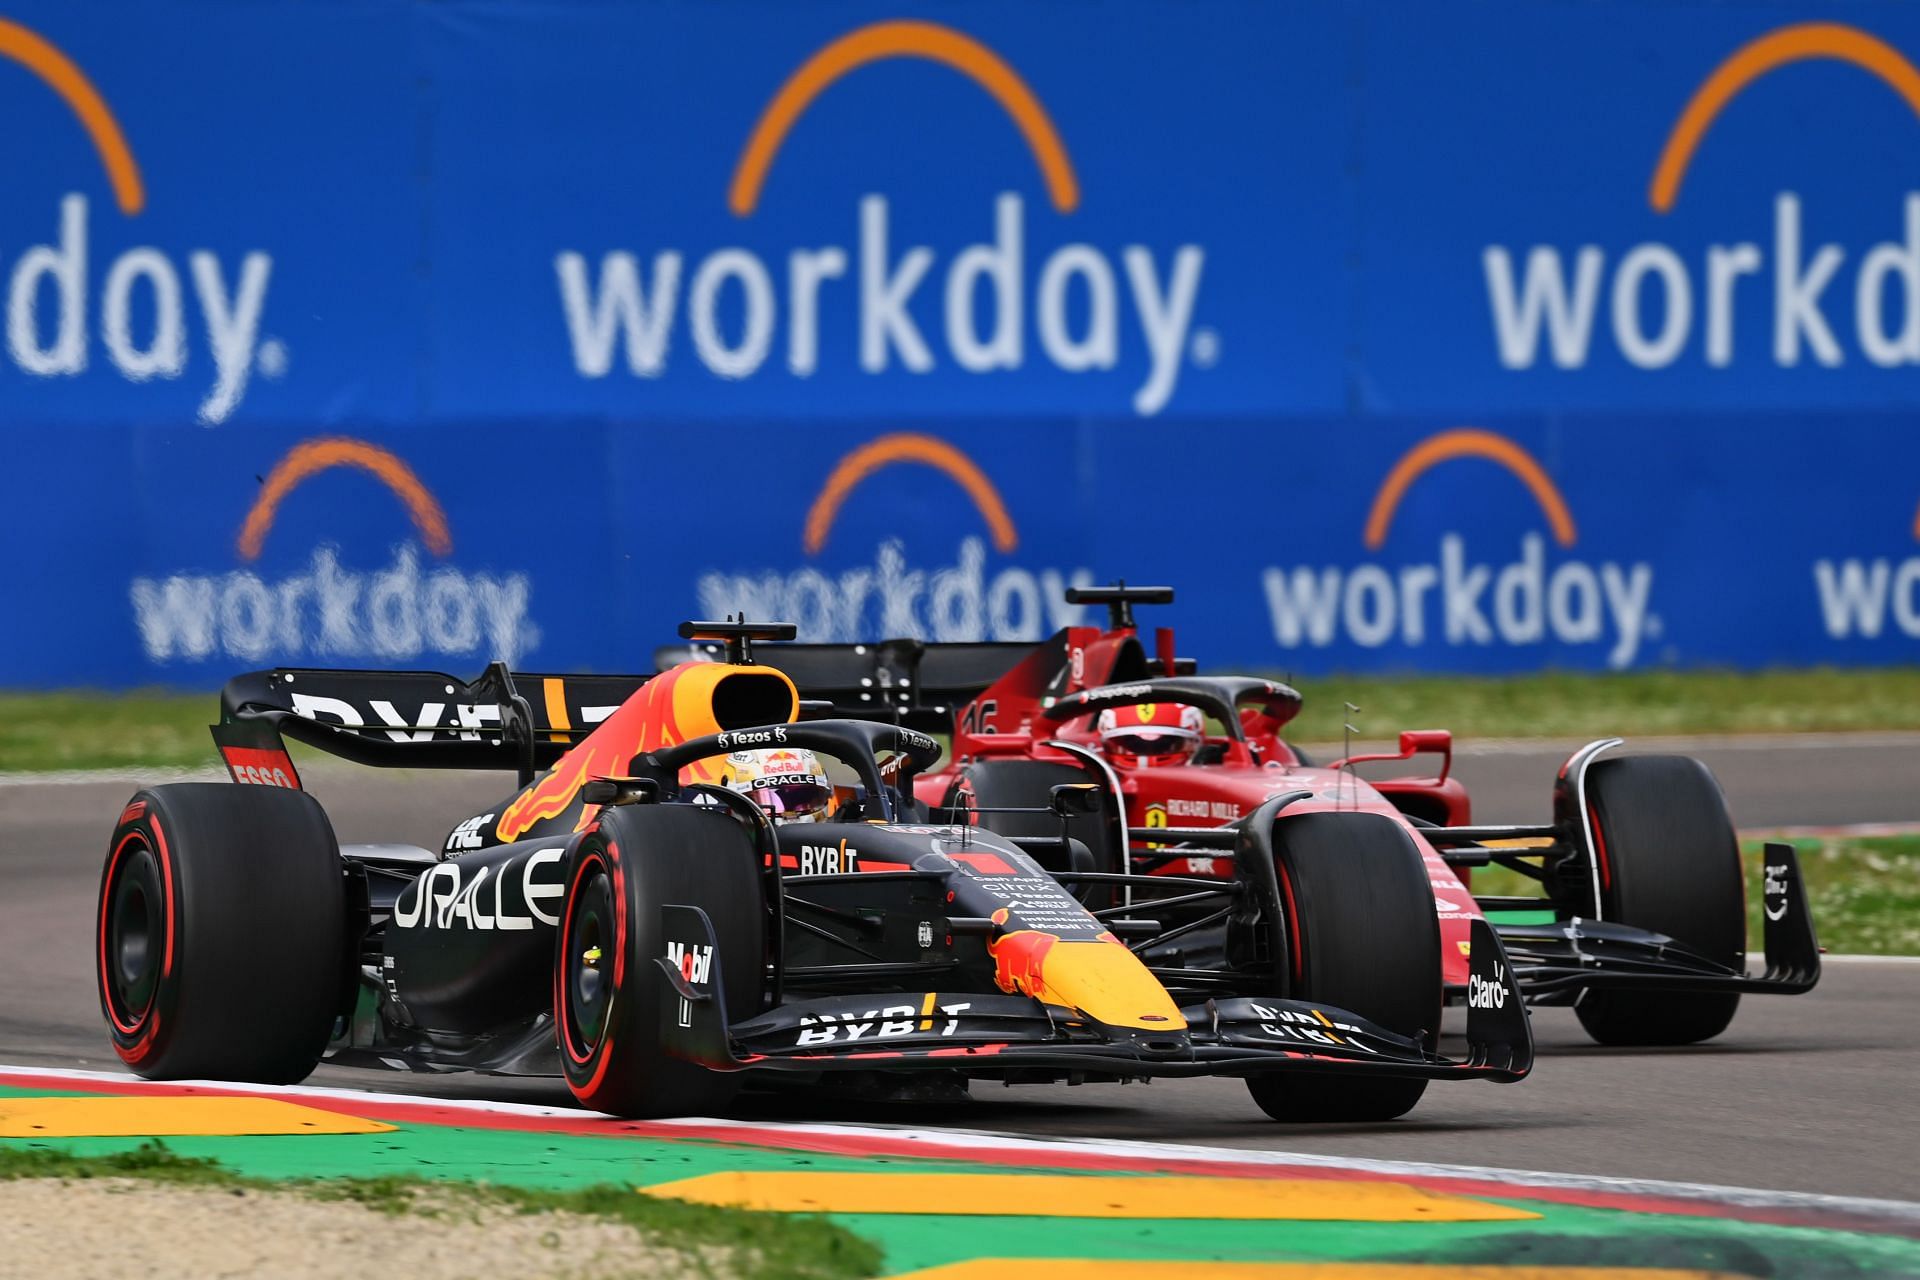 F1 Grand Prix of Emilia Romagna - Sprint - Max Verstappen (foreground) gets the move done on Charles Leclerc (background)